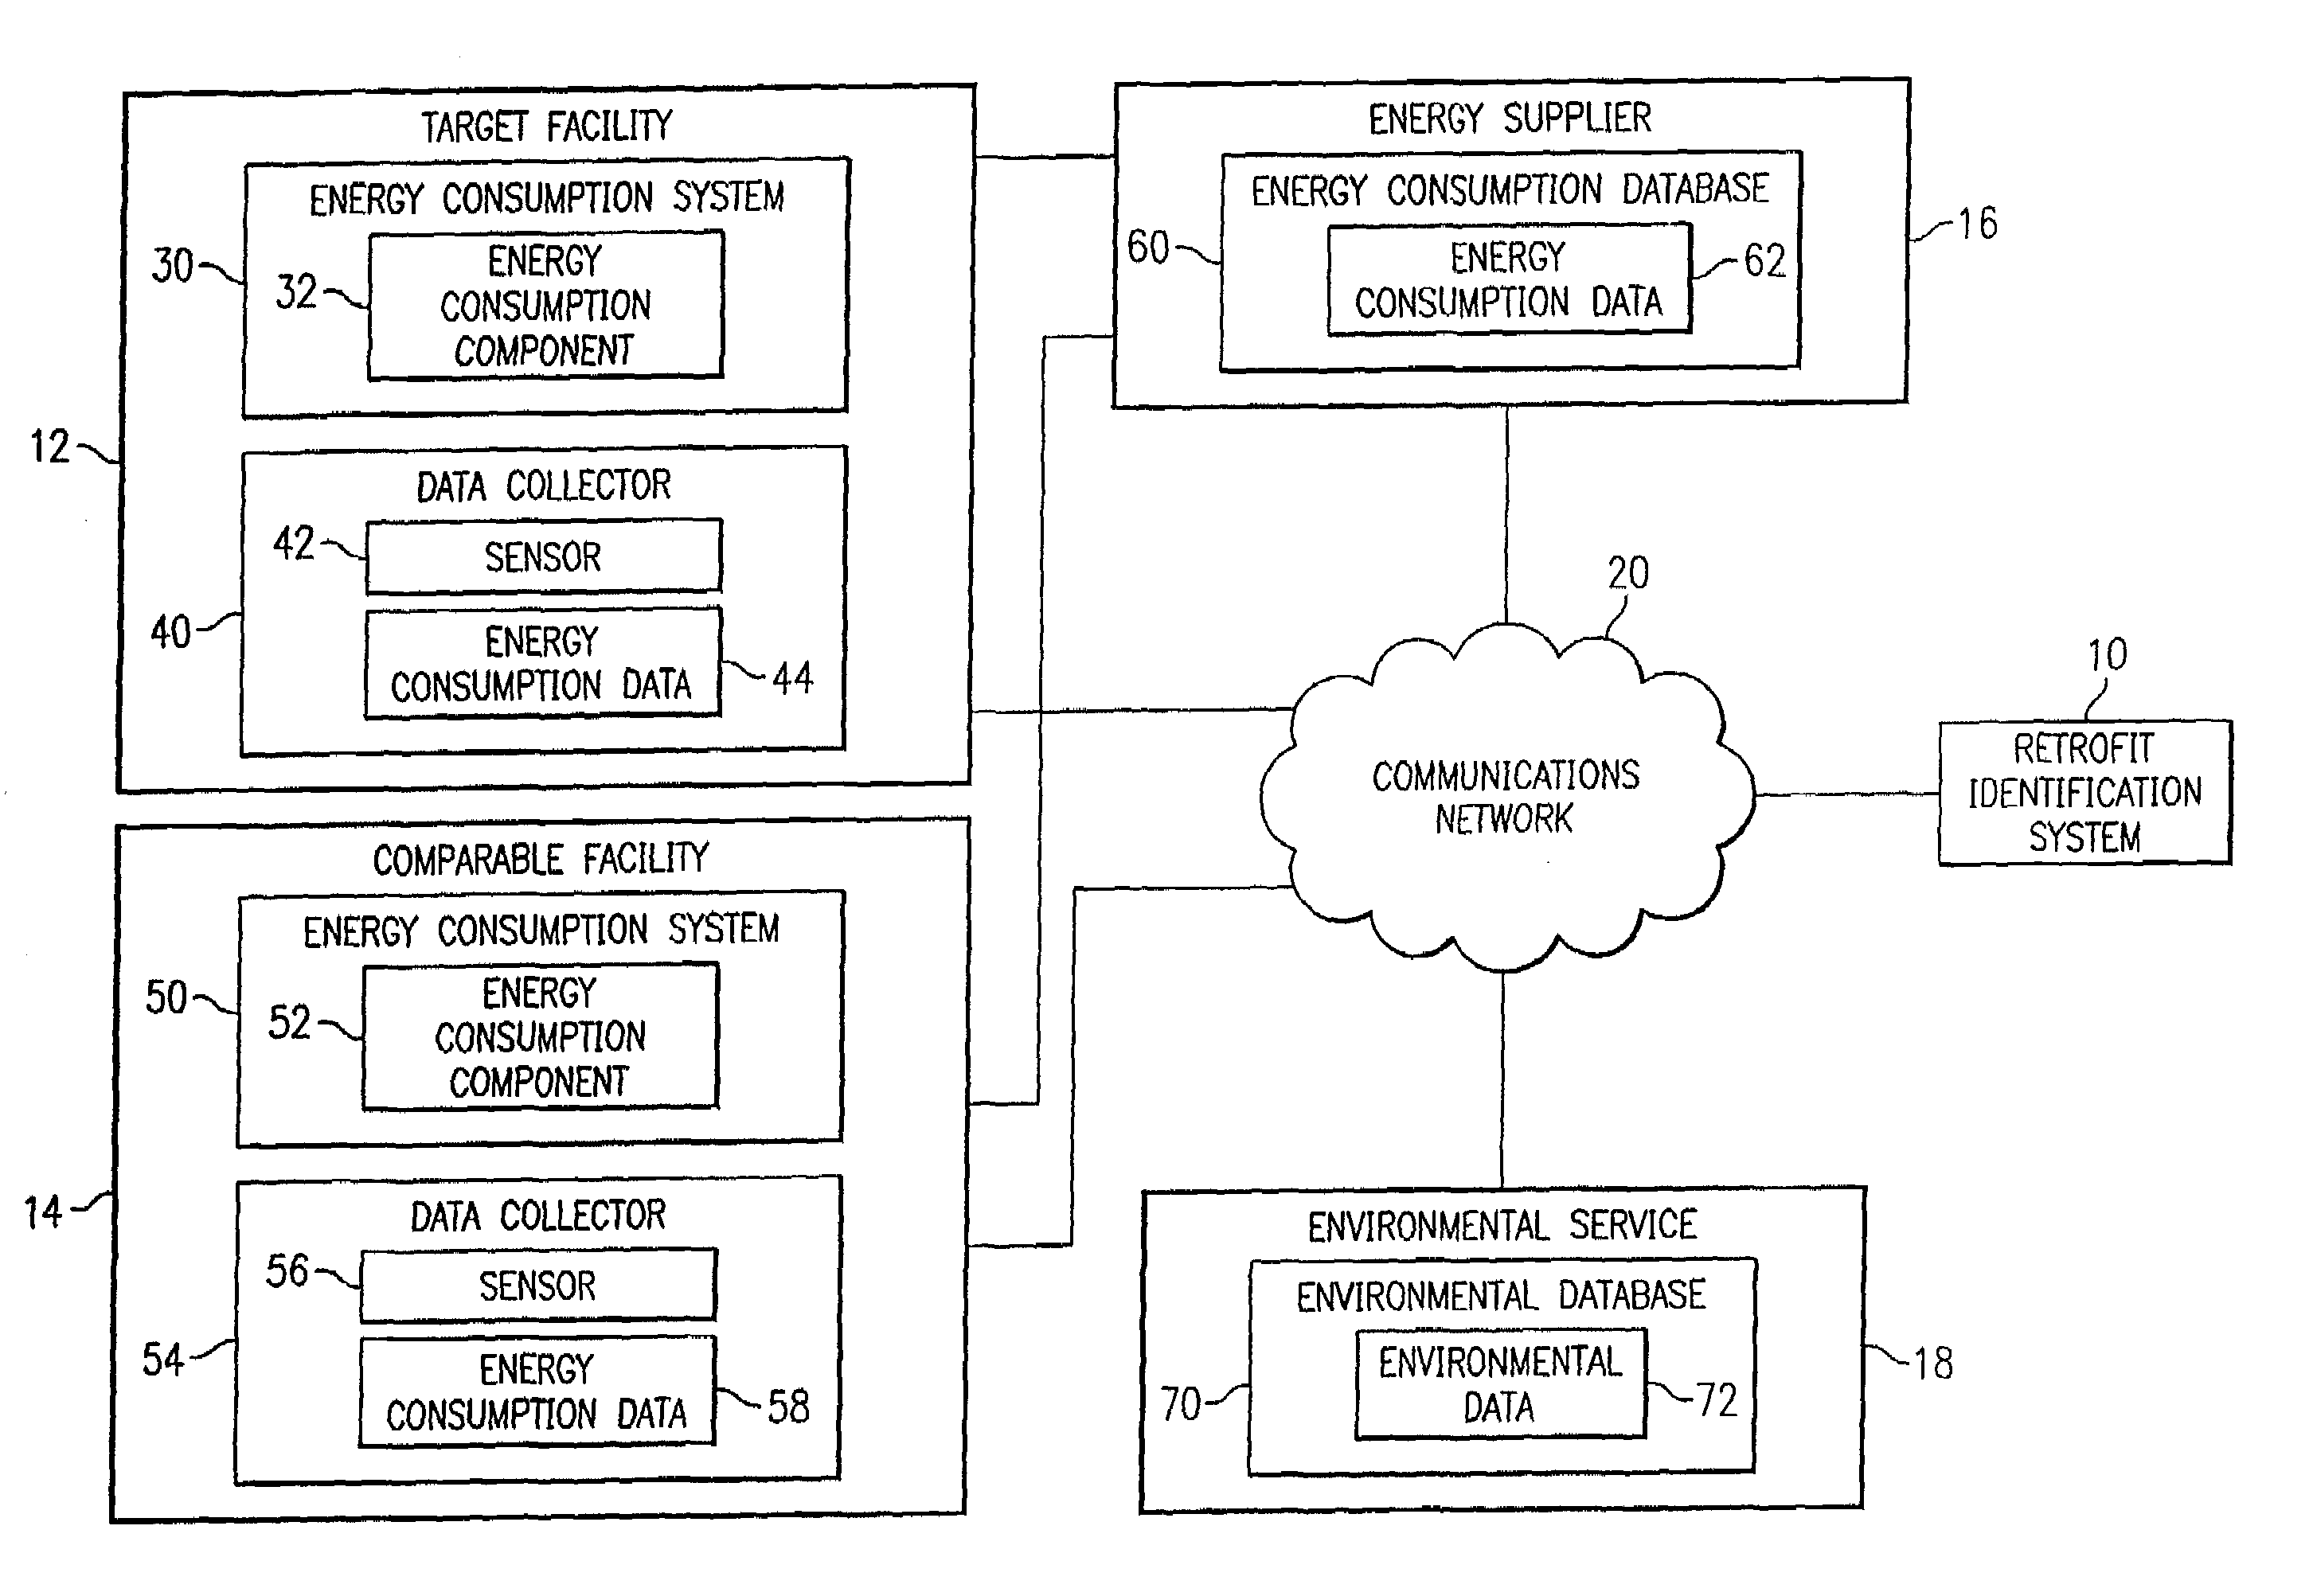 System and method for remote retrofit identification of energy consumption systems and components